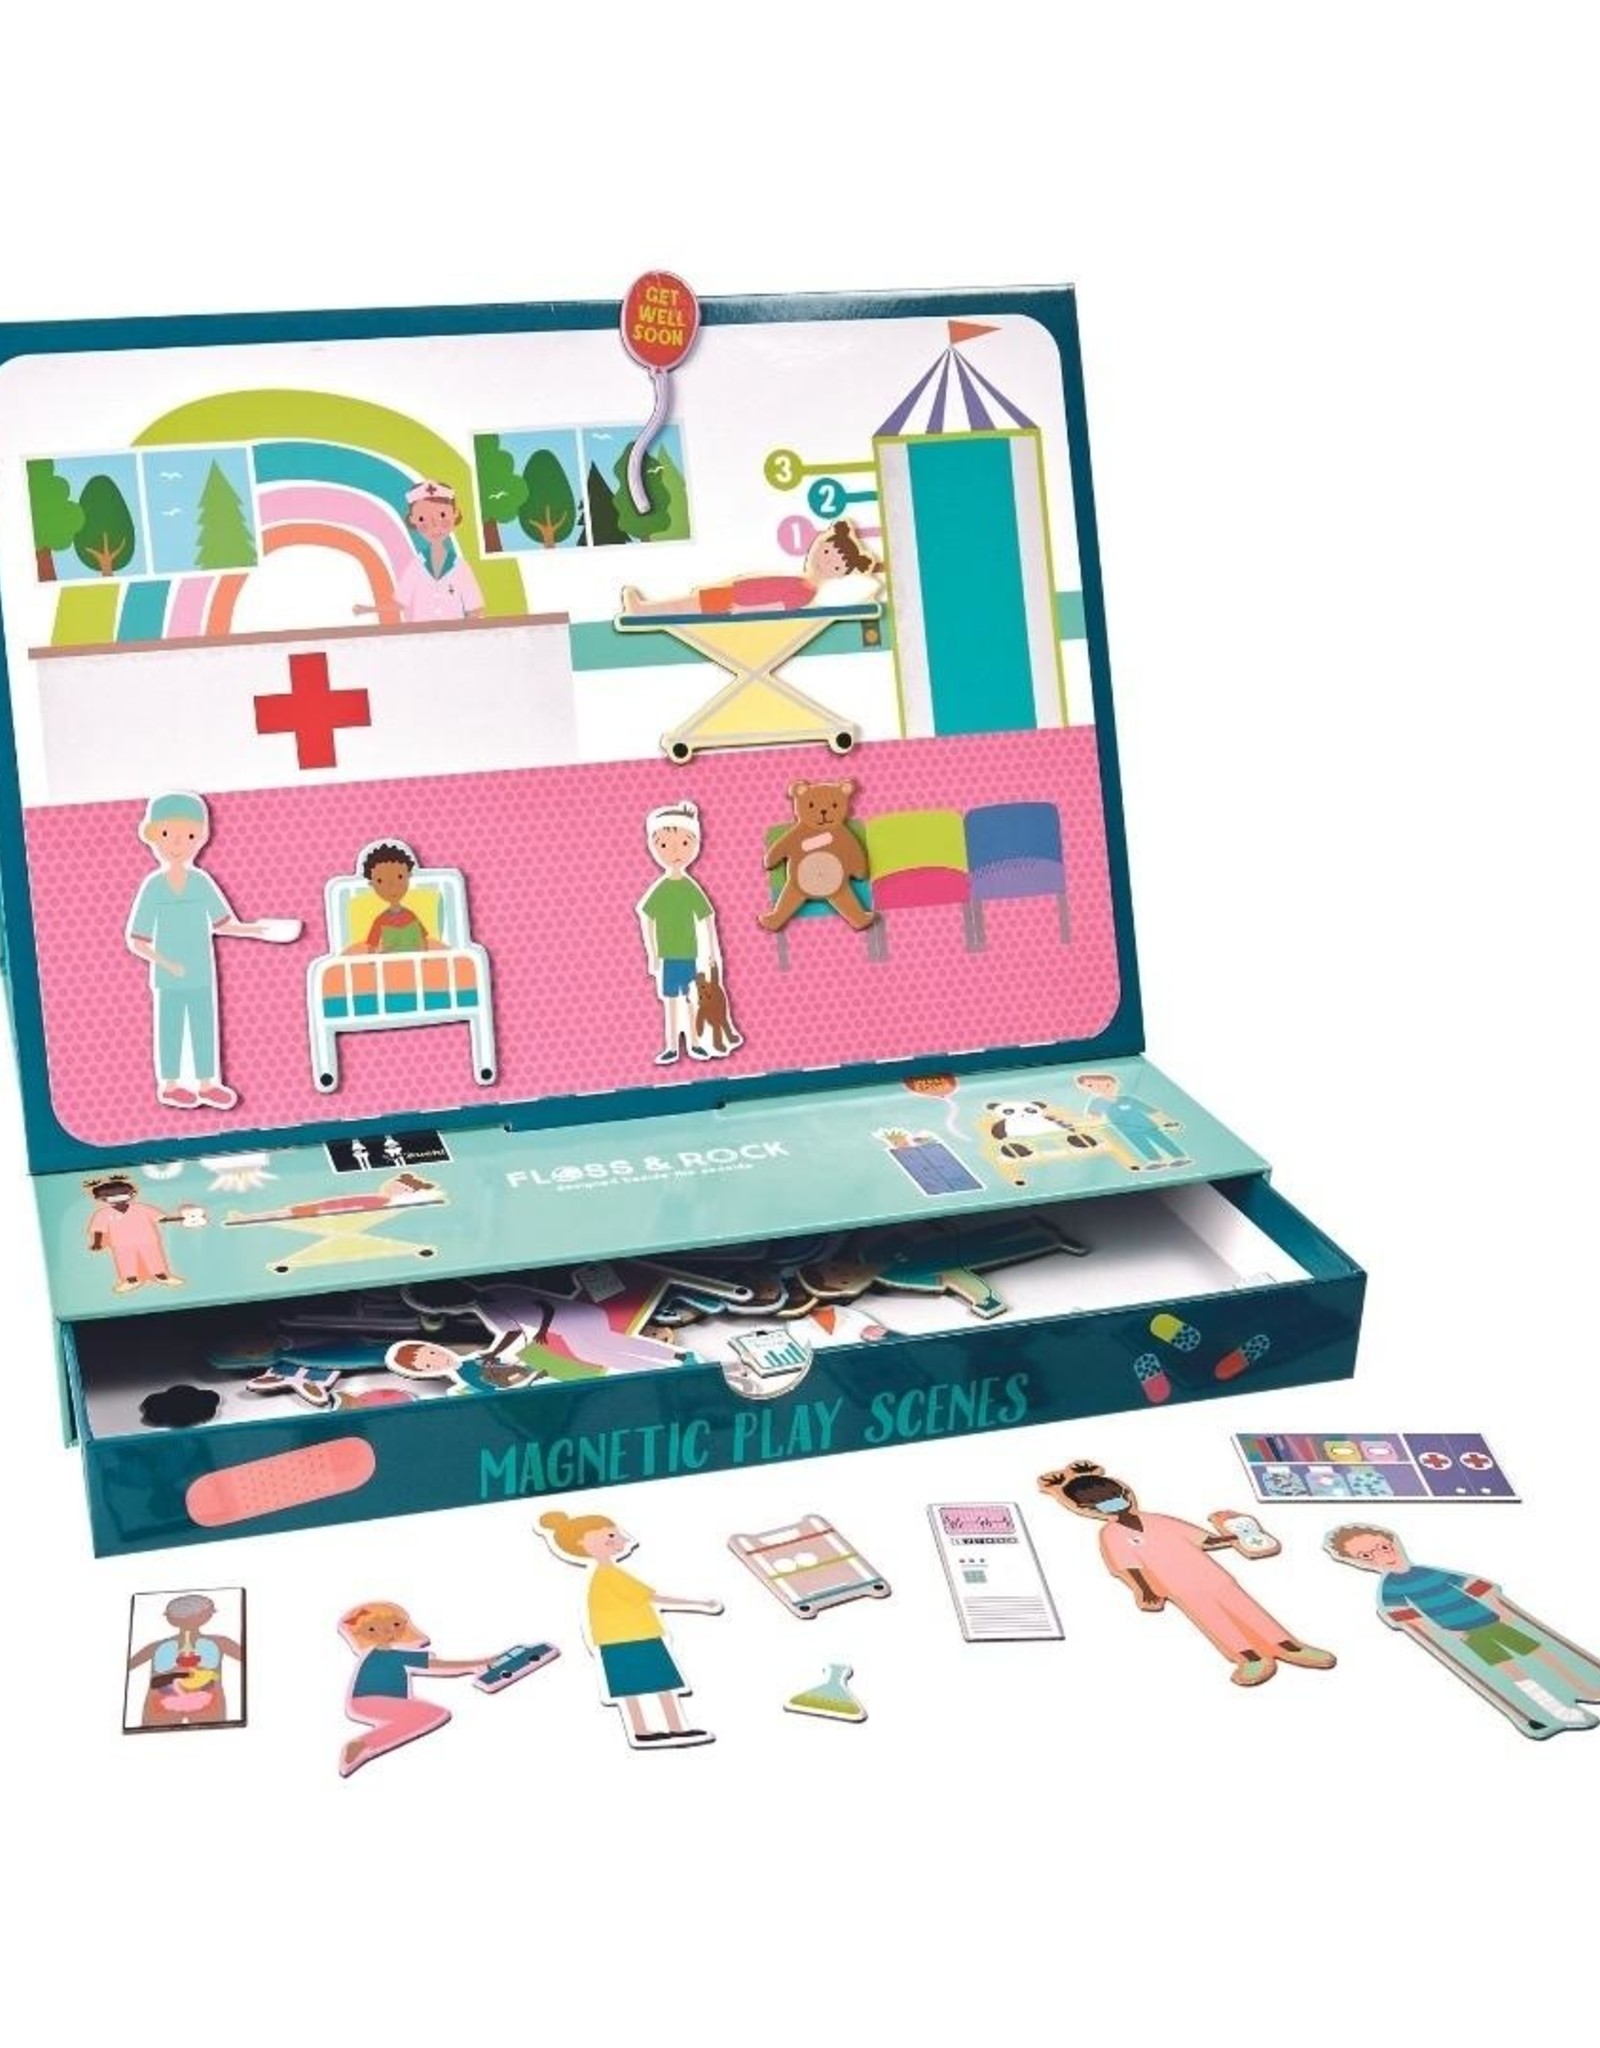 Floss and Rock Happy Hospital Magnetic Play Scenes